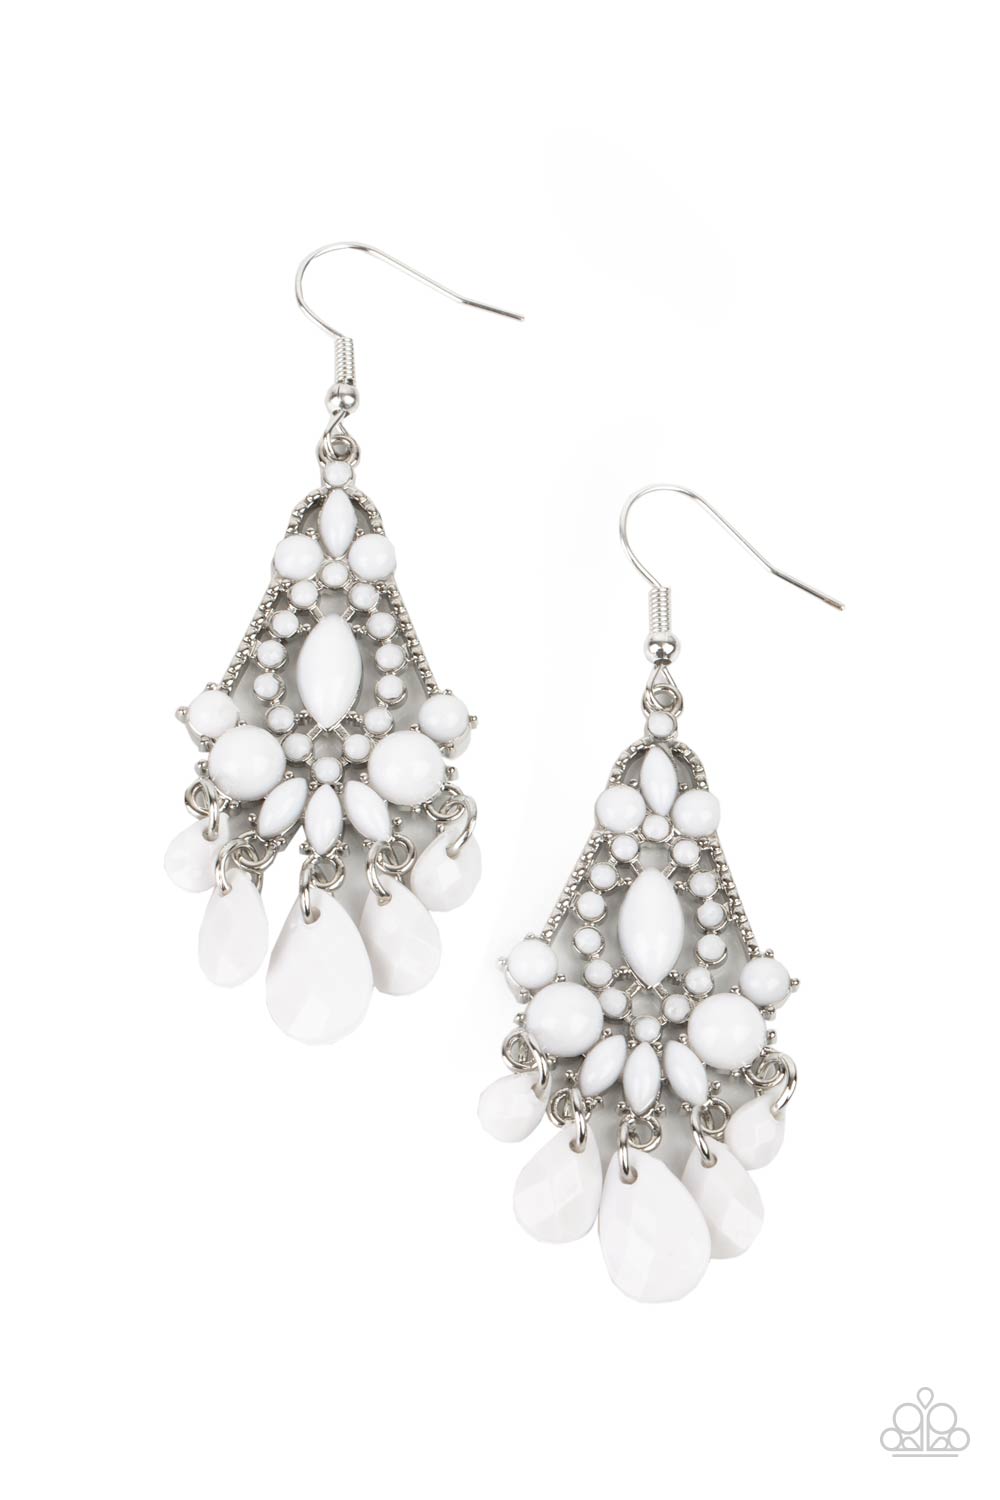 Paparazzi Earrings - Staycation Home - White